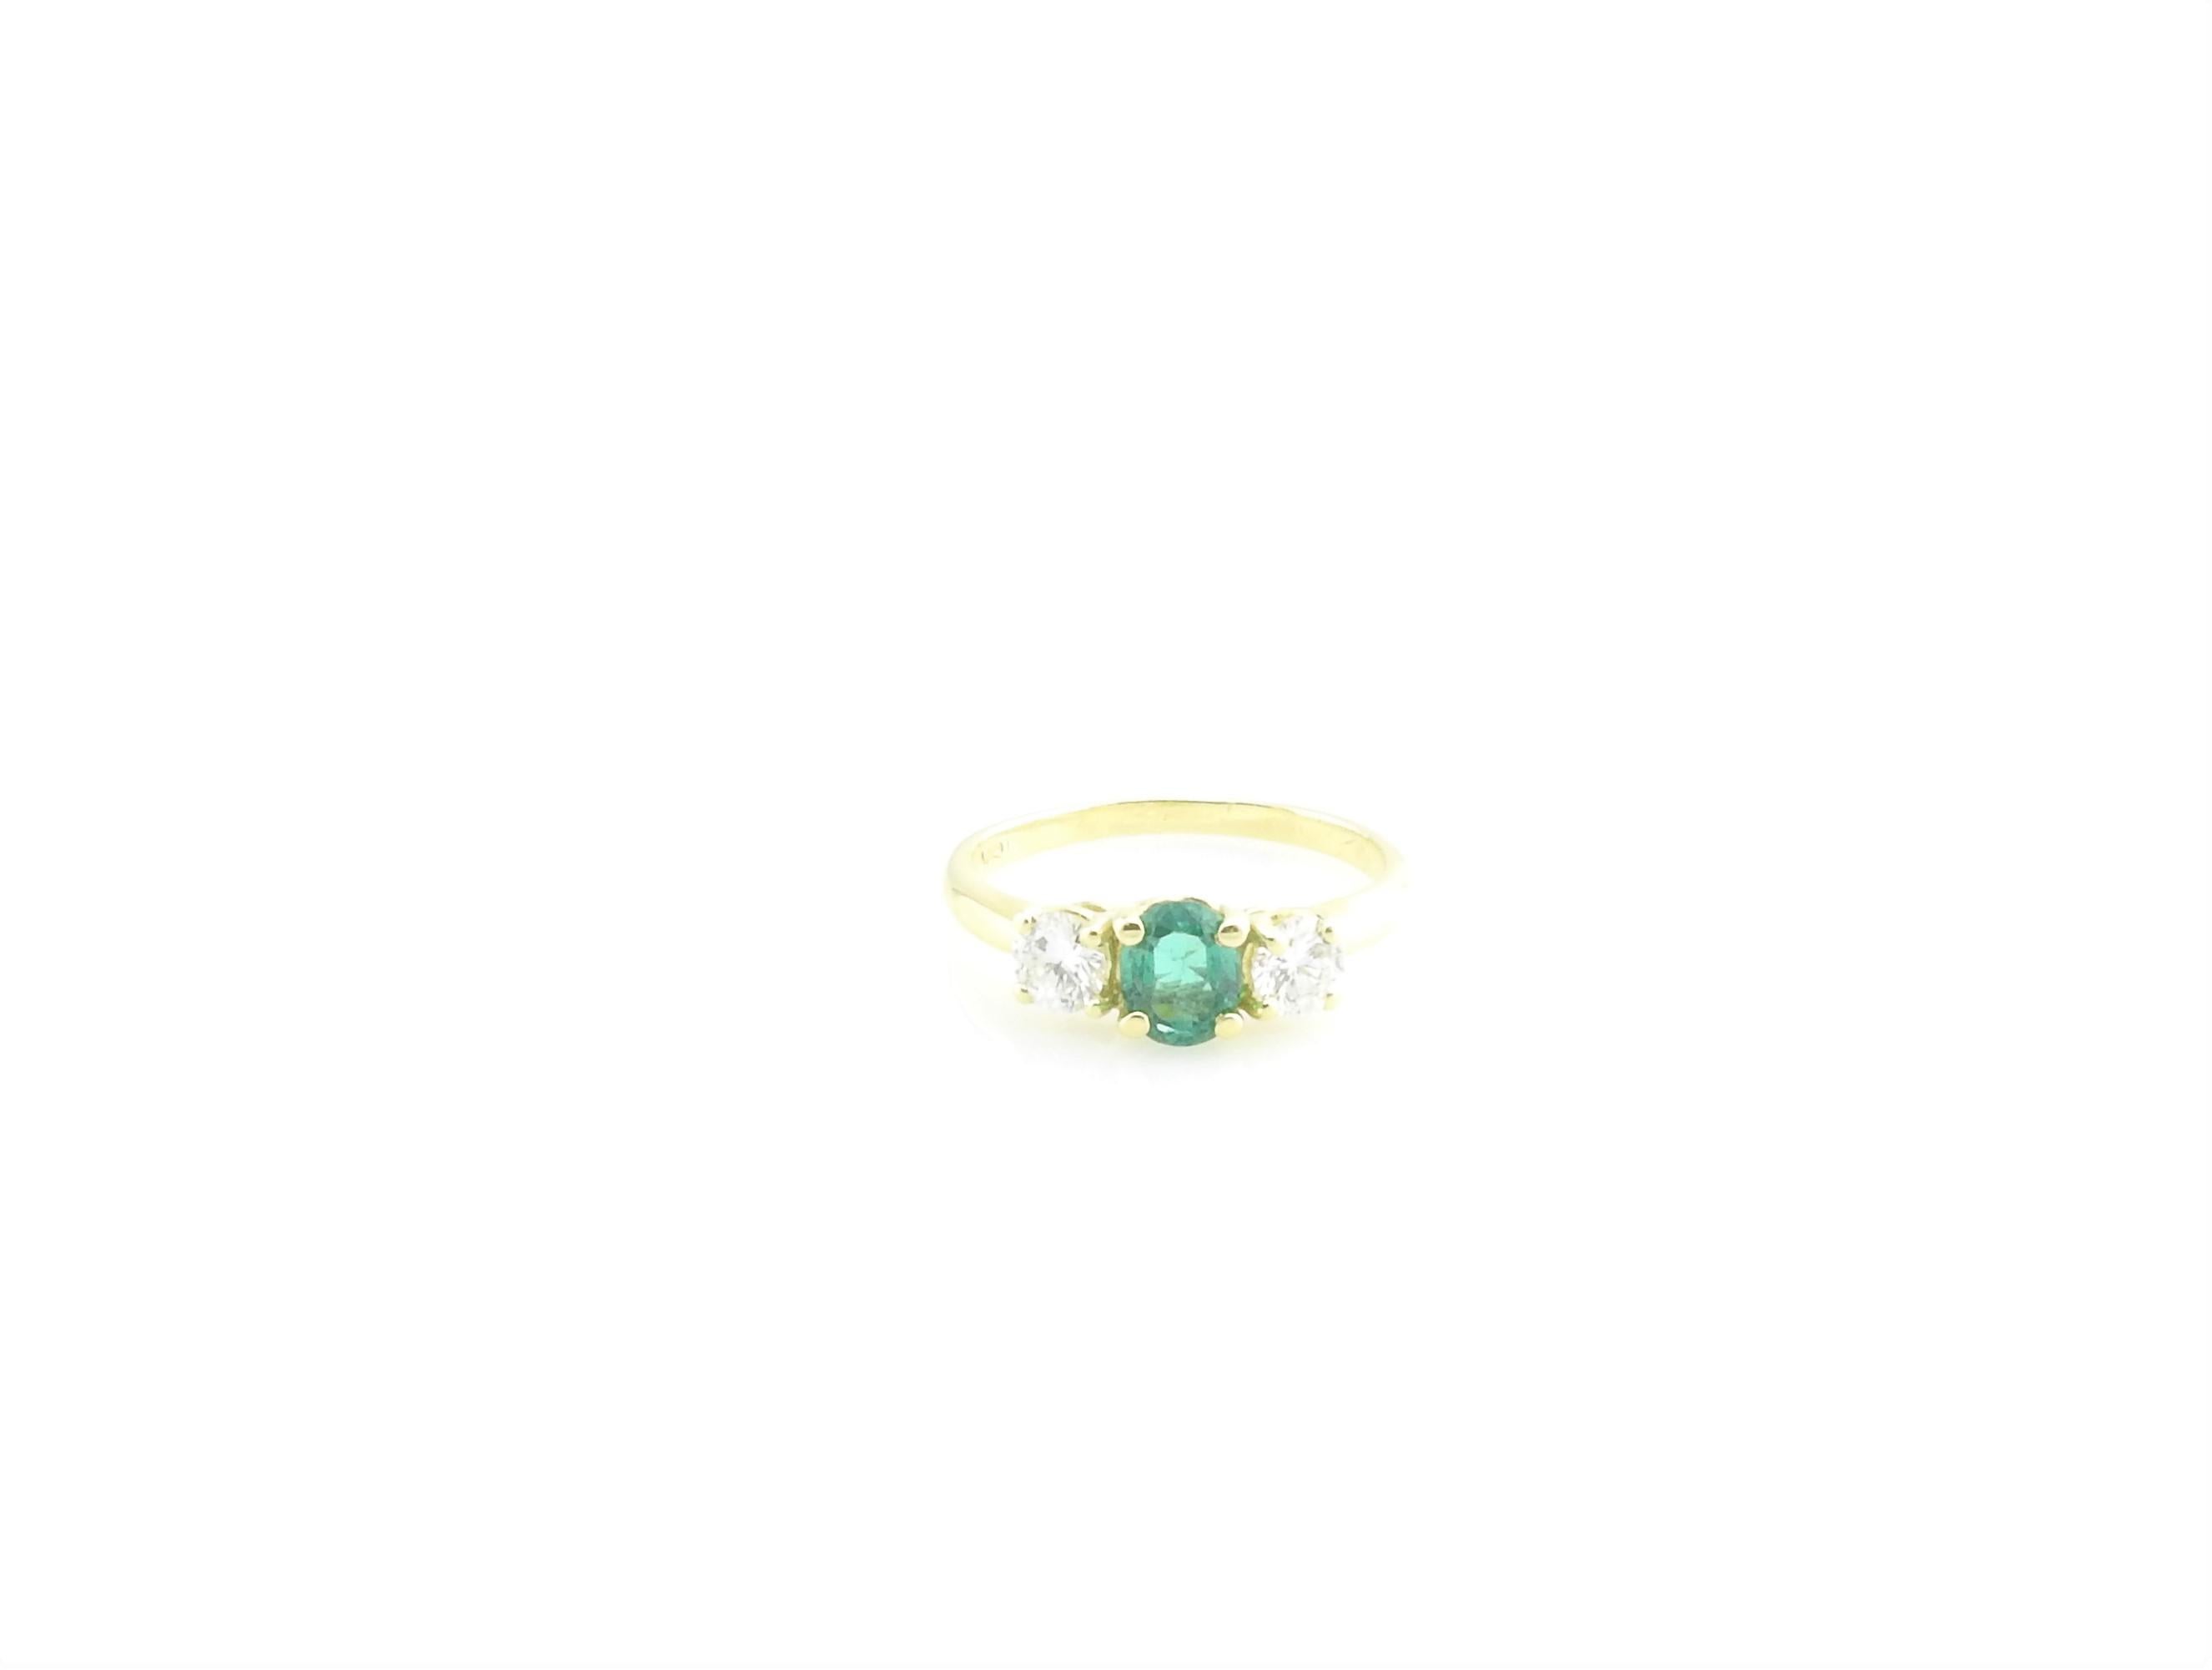 Vintage 18 Karat Yellow Gold Emerald and Diamond Ring Size 6.5-

This lovely ring features one oval green emerald (approx. .40 ct.) and two round brilliant cut diamonds set in classic 18K yellow gold.

Shank: 1 mm.

Gemological Appraisal Industry